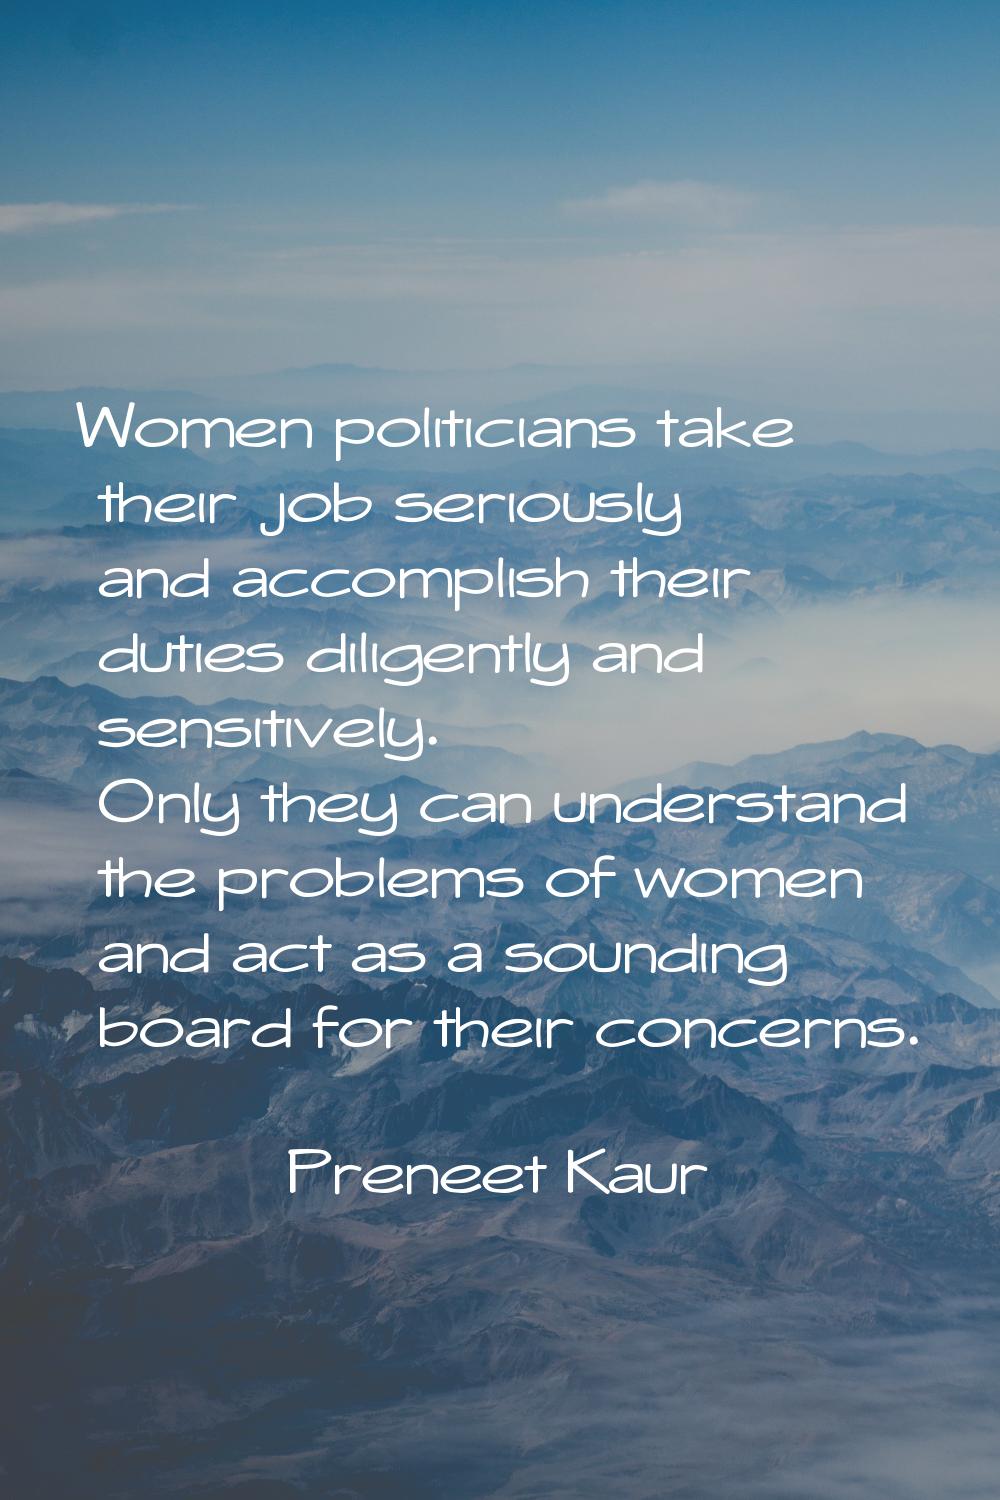 Women politicians take their job seriously and accomplish their duties diligently and sensitively. 